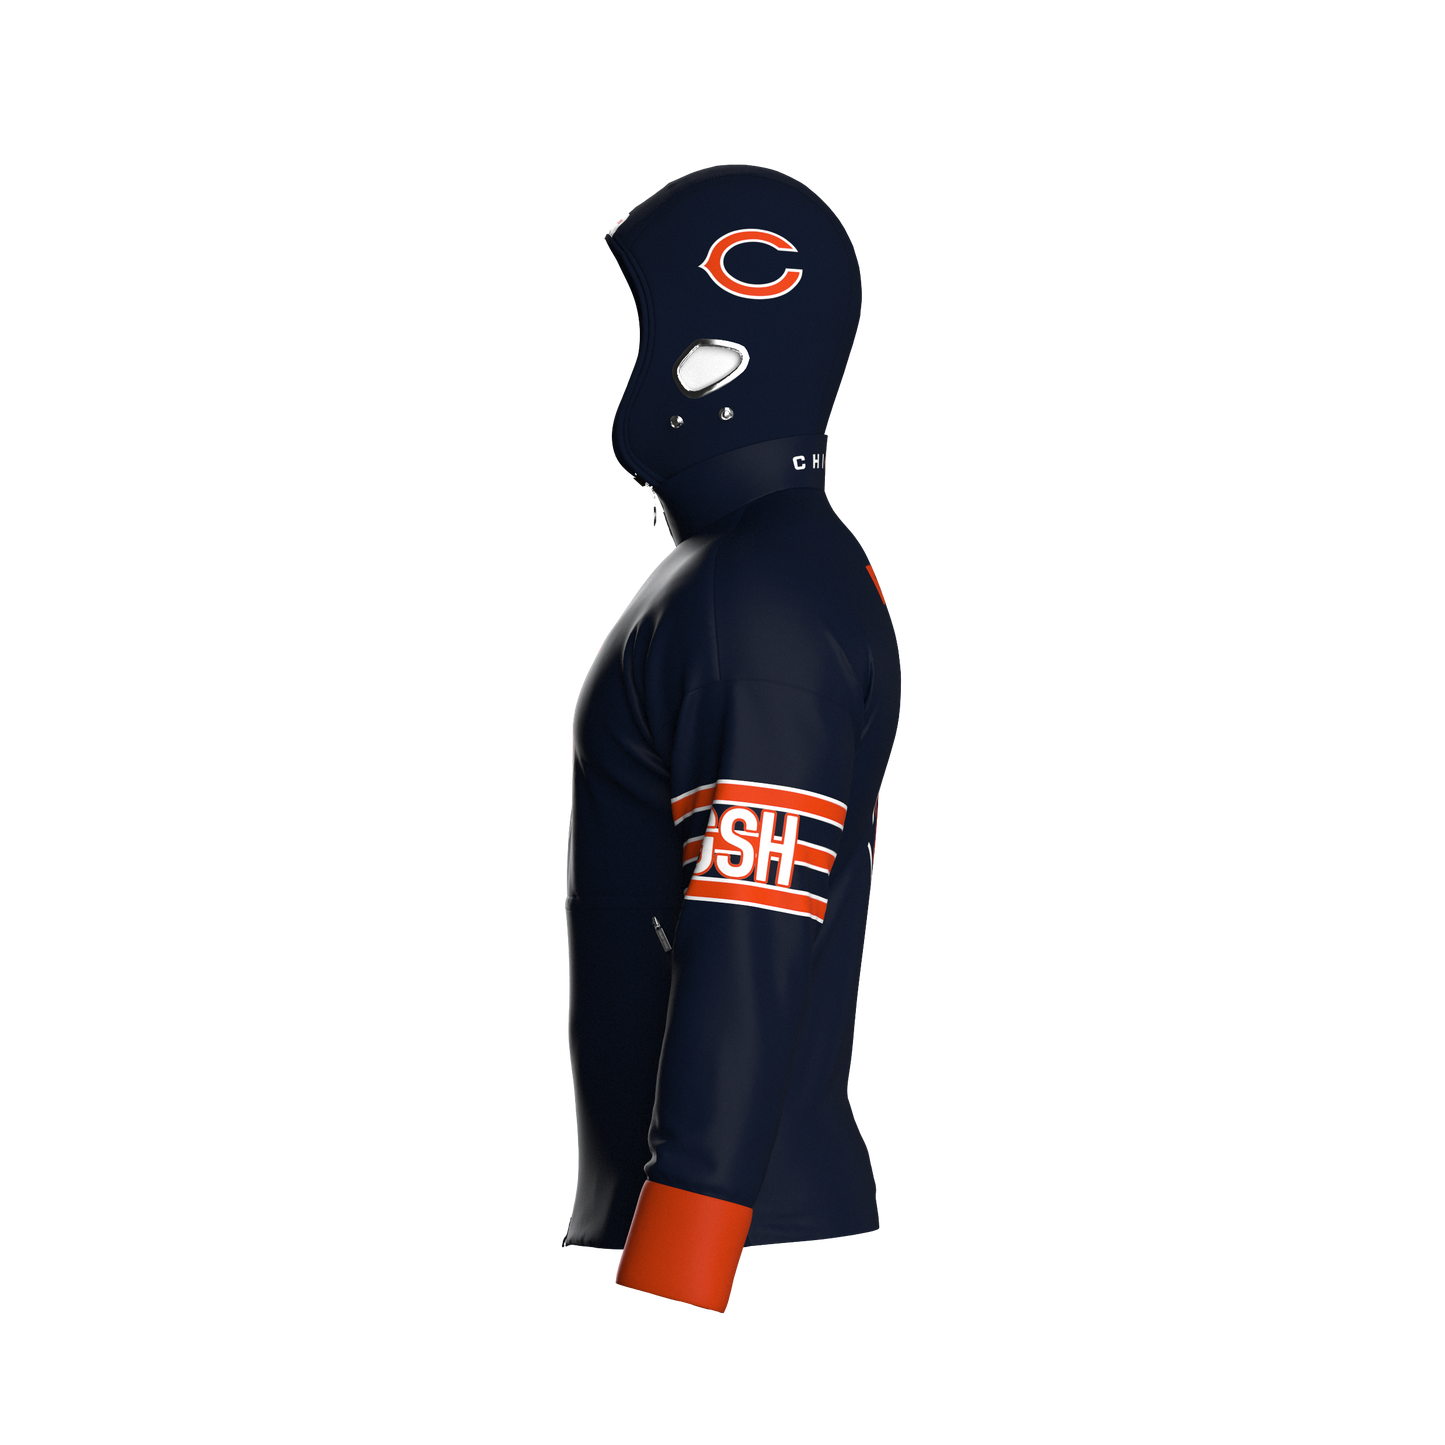 Chicago Bears Home Zip-Up (adult)